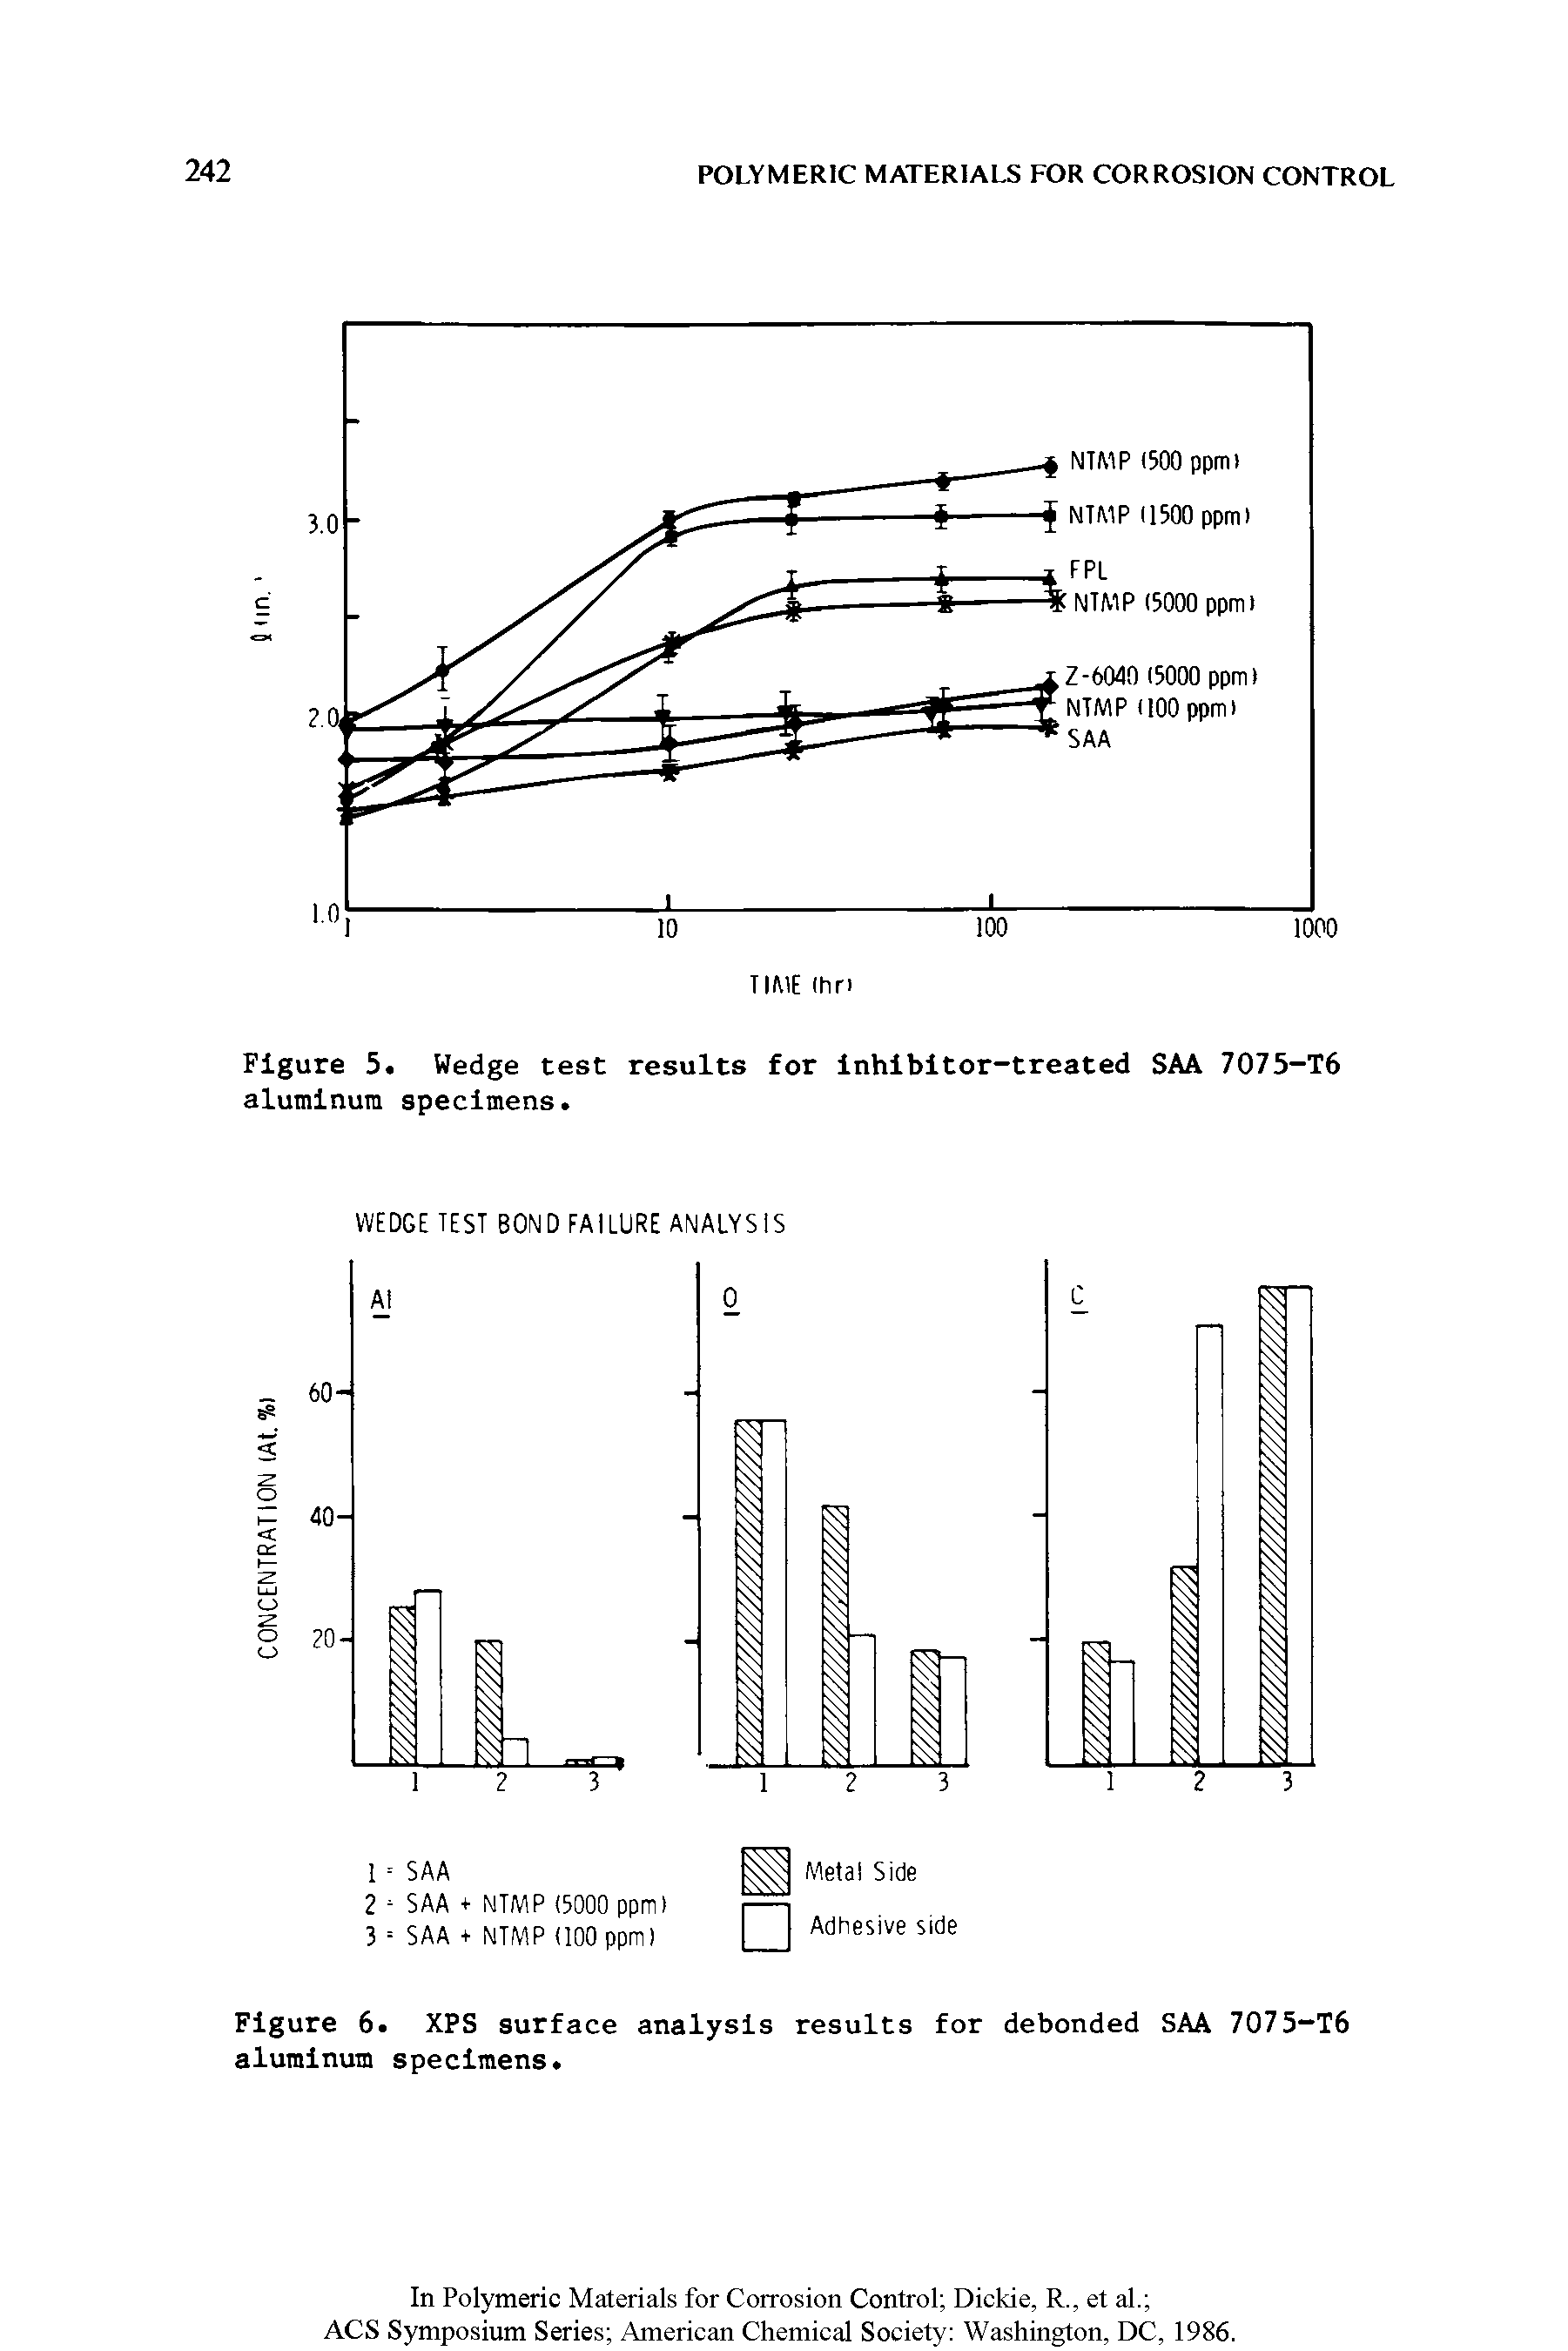 Figure 6. XPS surface analysis results for debonded SAA 7075-T6 aluminum specimens.